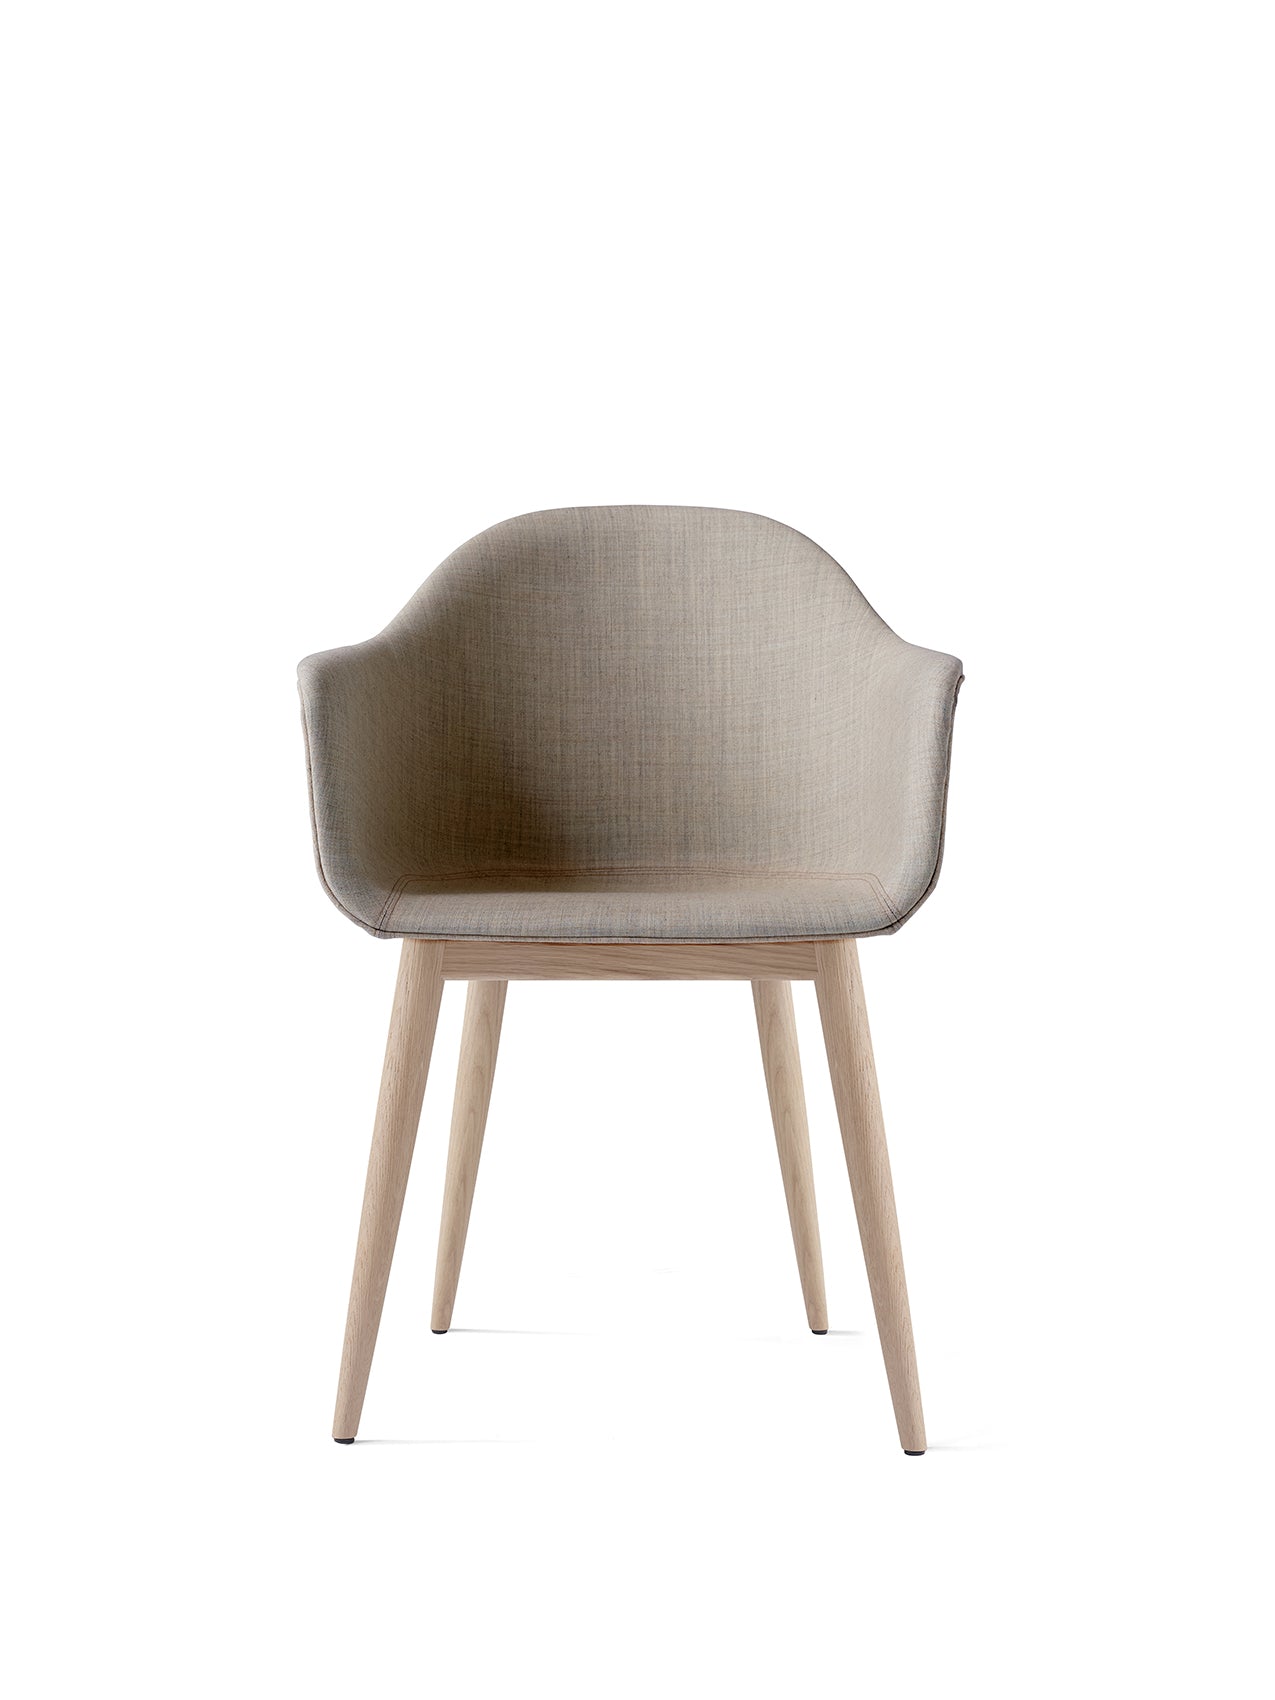 Harbour Dining Chair, Wooden Base, upholstered